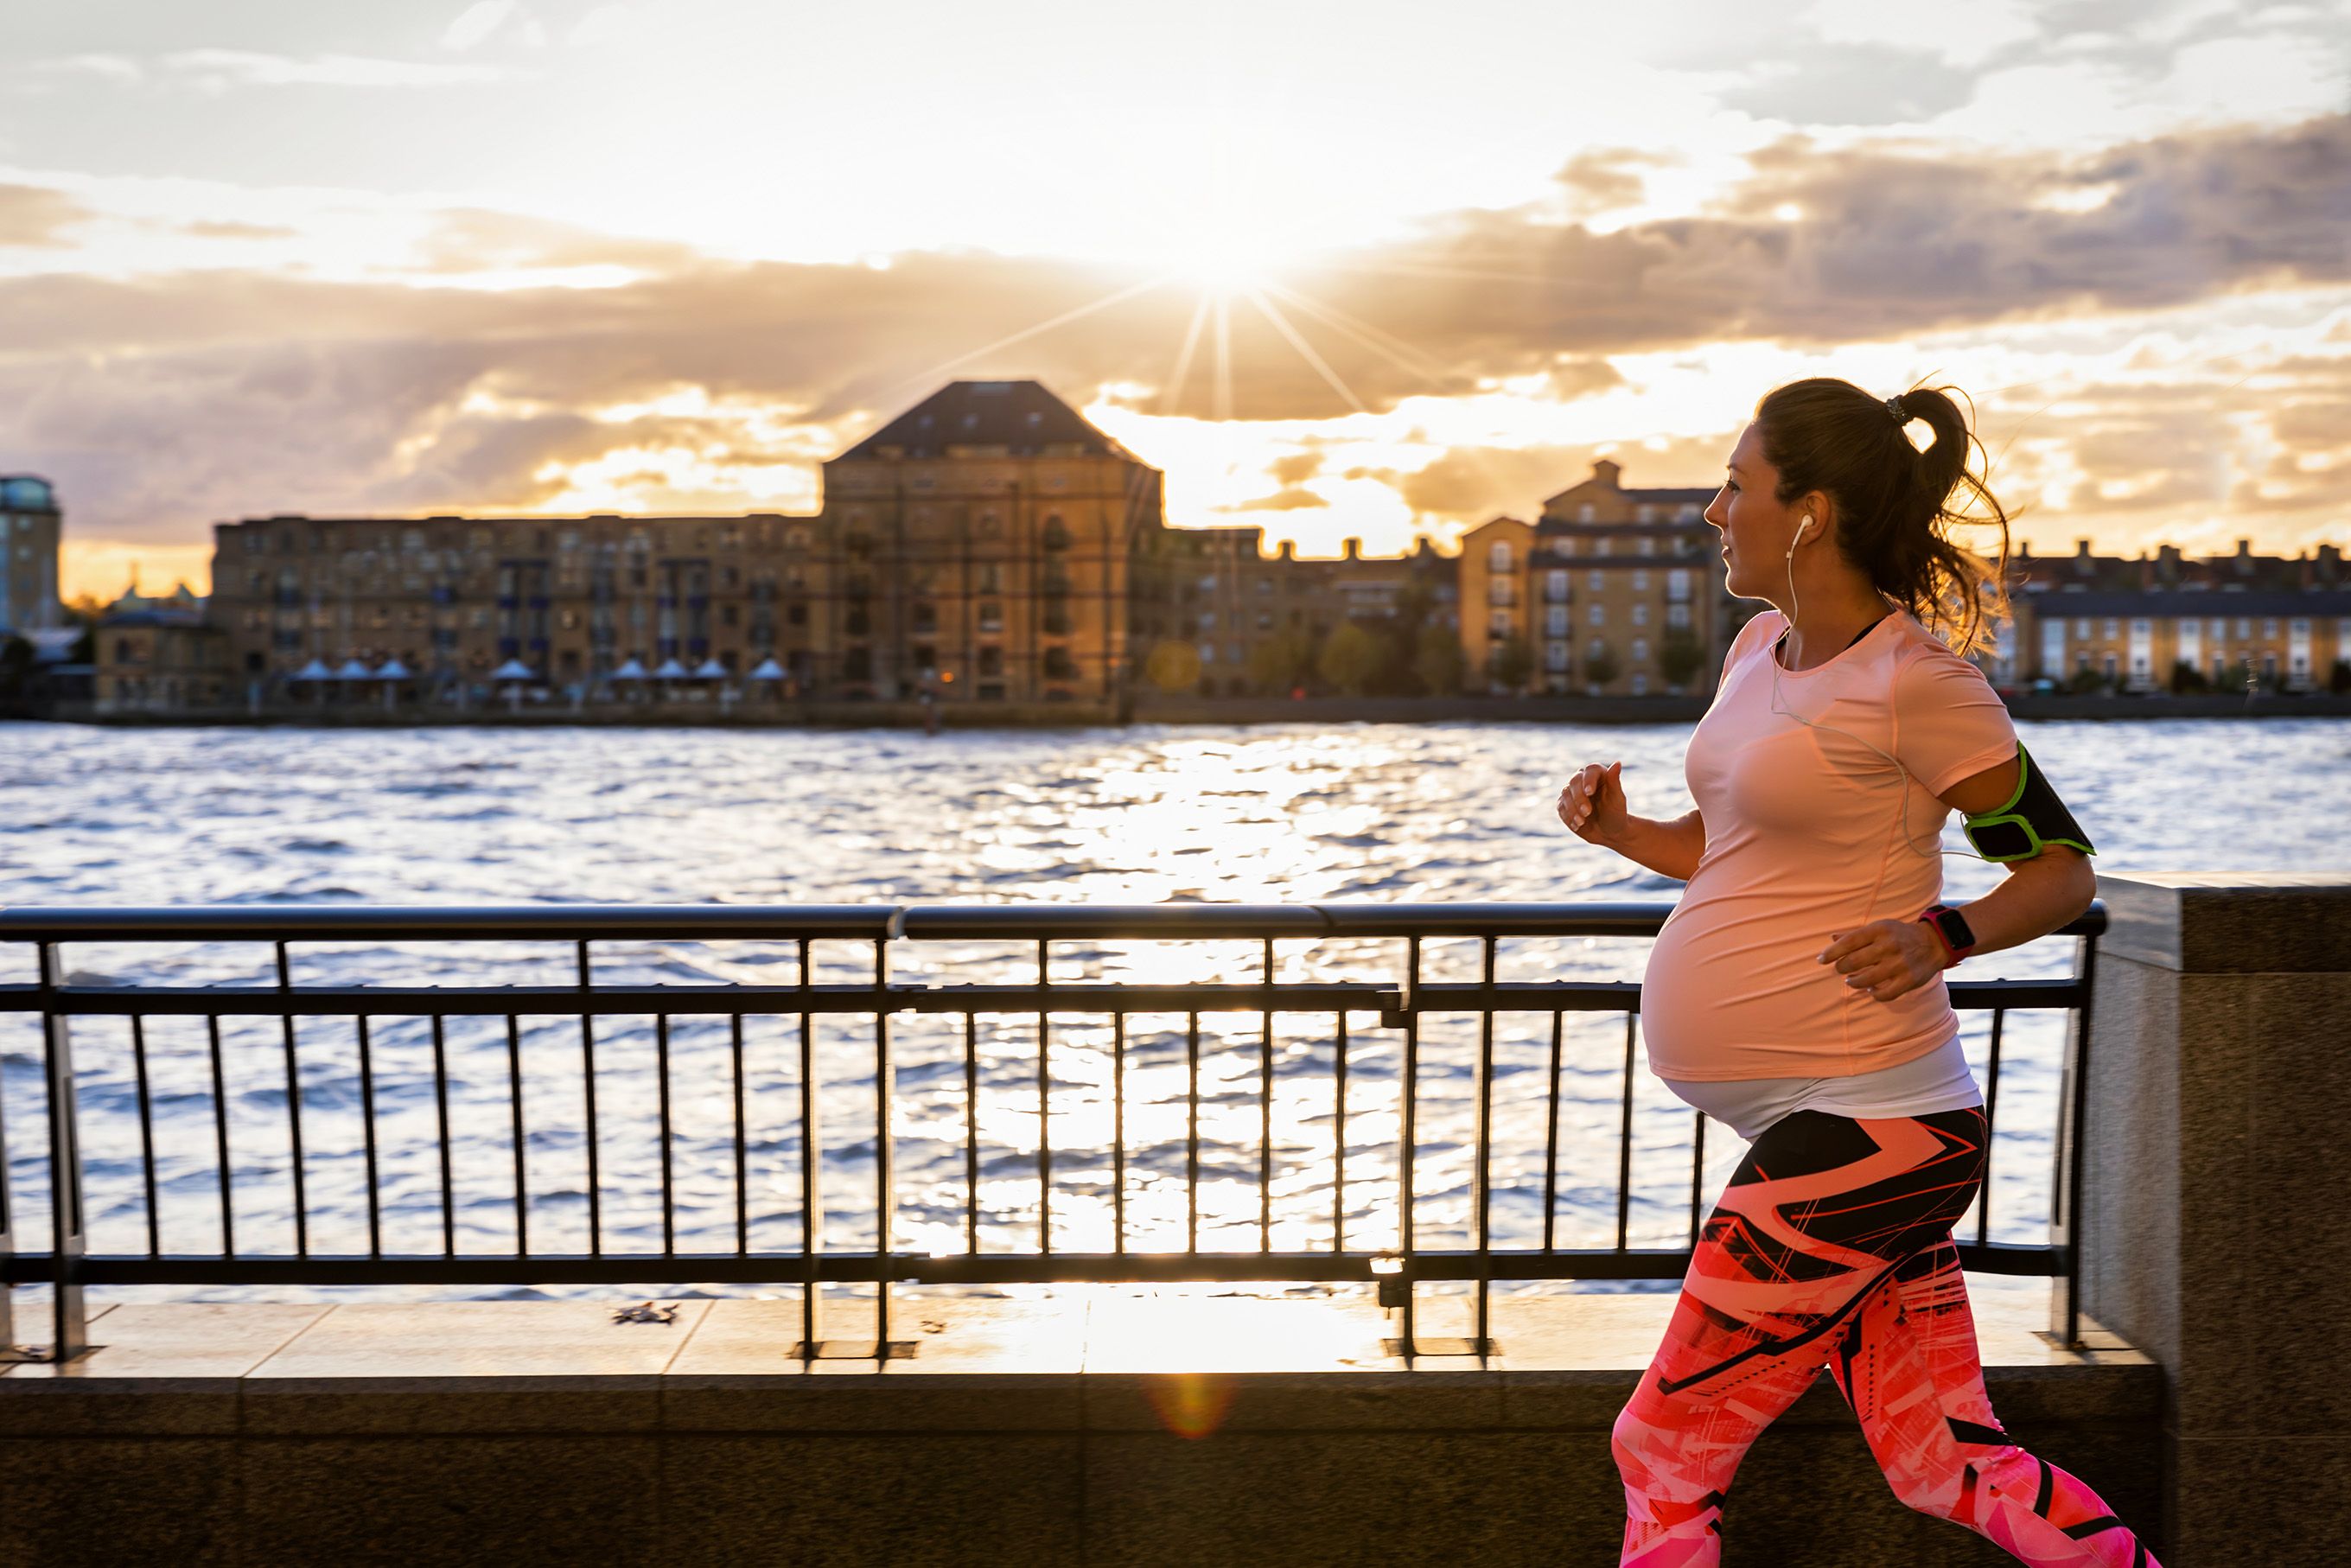 Almost 8 out of 10 women feel unsafe when running or jogging in